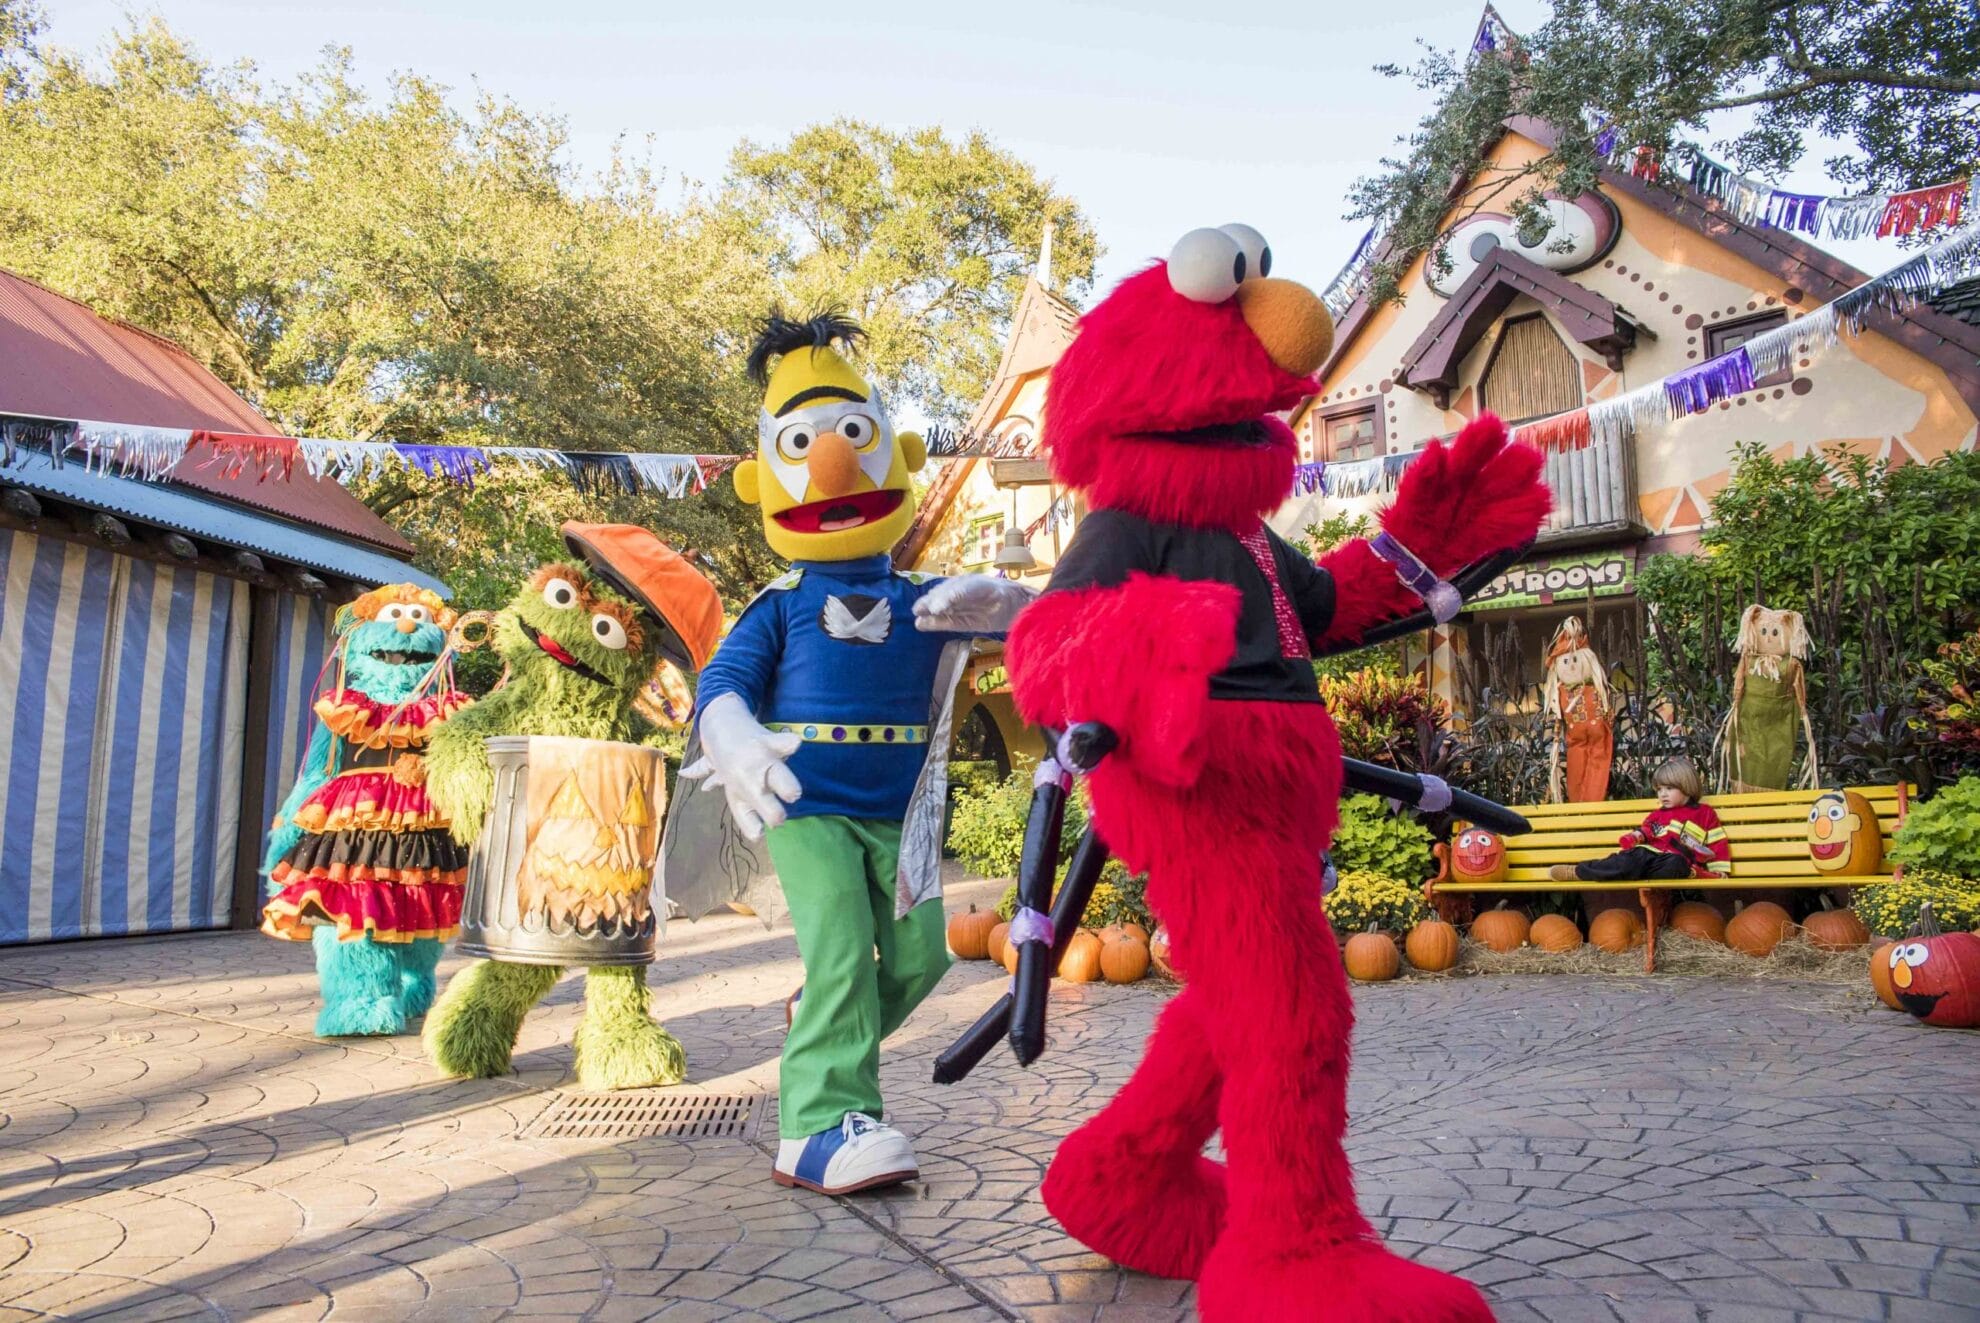 Busch Gardens® Tampa Bay welcomes back Sesame Street® Kids’ Weekends this October with Halloween fun each Saturday and Sunday in October. New this year, families can tune into the Not-Too-Spooky Howl-O-Ween Radio Show, debuting at the park on Saturday, October 6 starring Count von Count. Sesame Street Kids’ Weekends are included with daily admission to Busch Gardens Tampa Bay. Children are welcome to wear Halloween costumes and enjoy weekends jam-packed with fun fall activities.